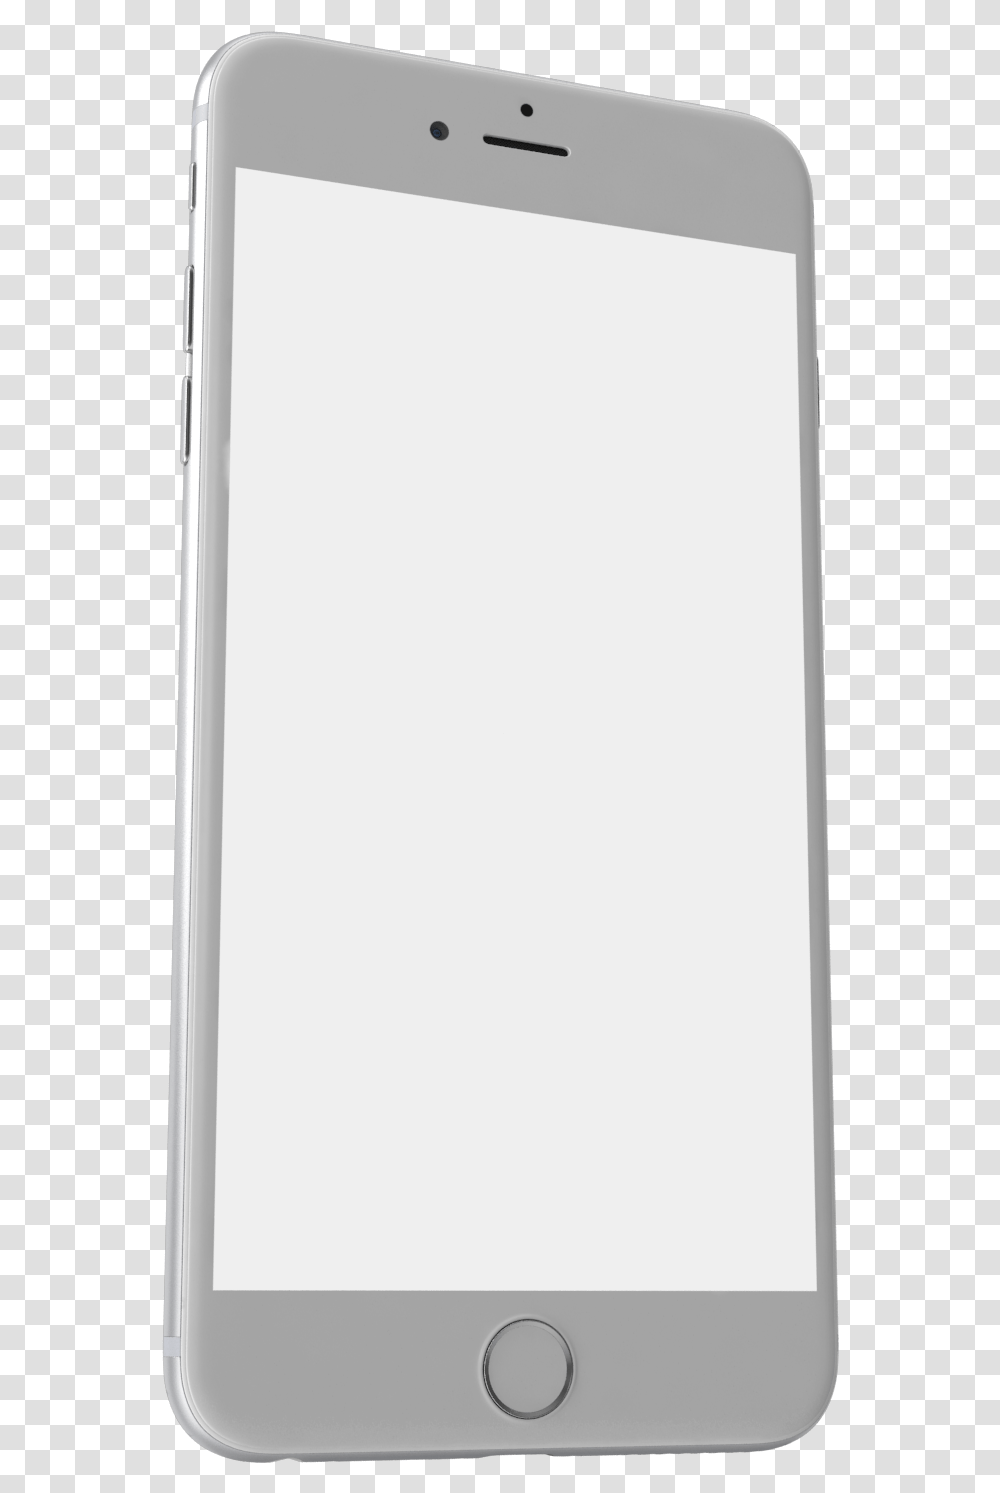 Iphone 6 Plus Silver Smartphone, Electronics, Mobile Phone, Cell Phone Transparent Png